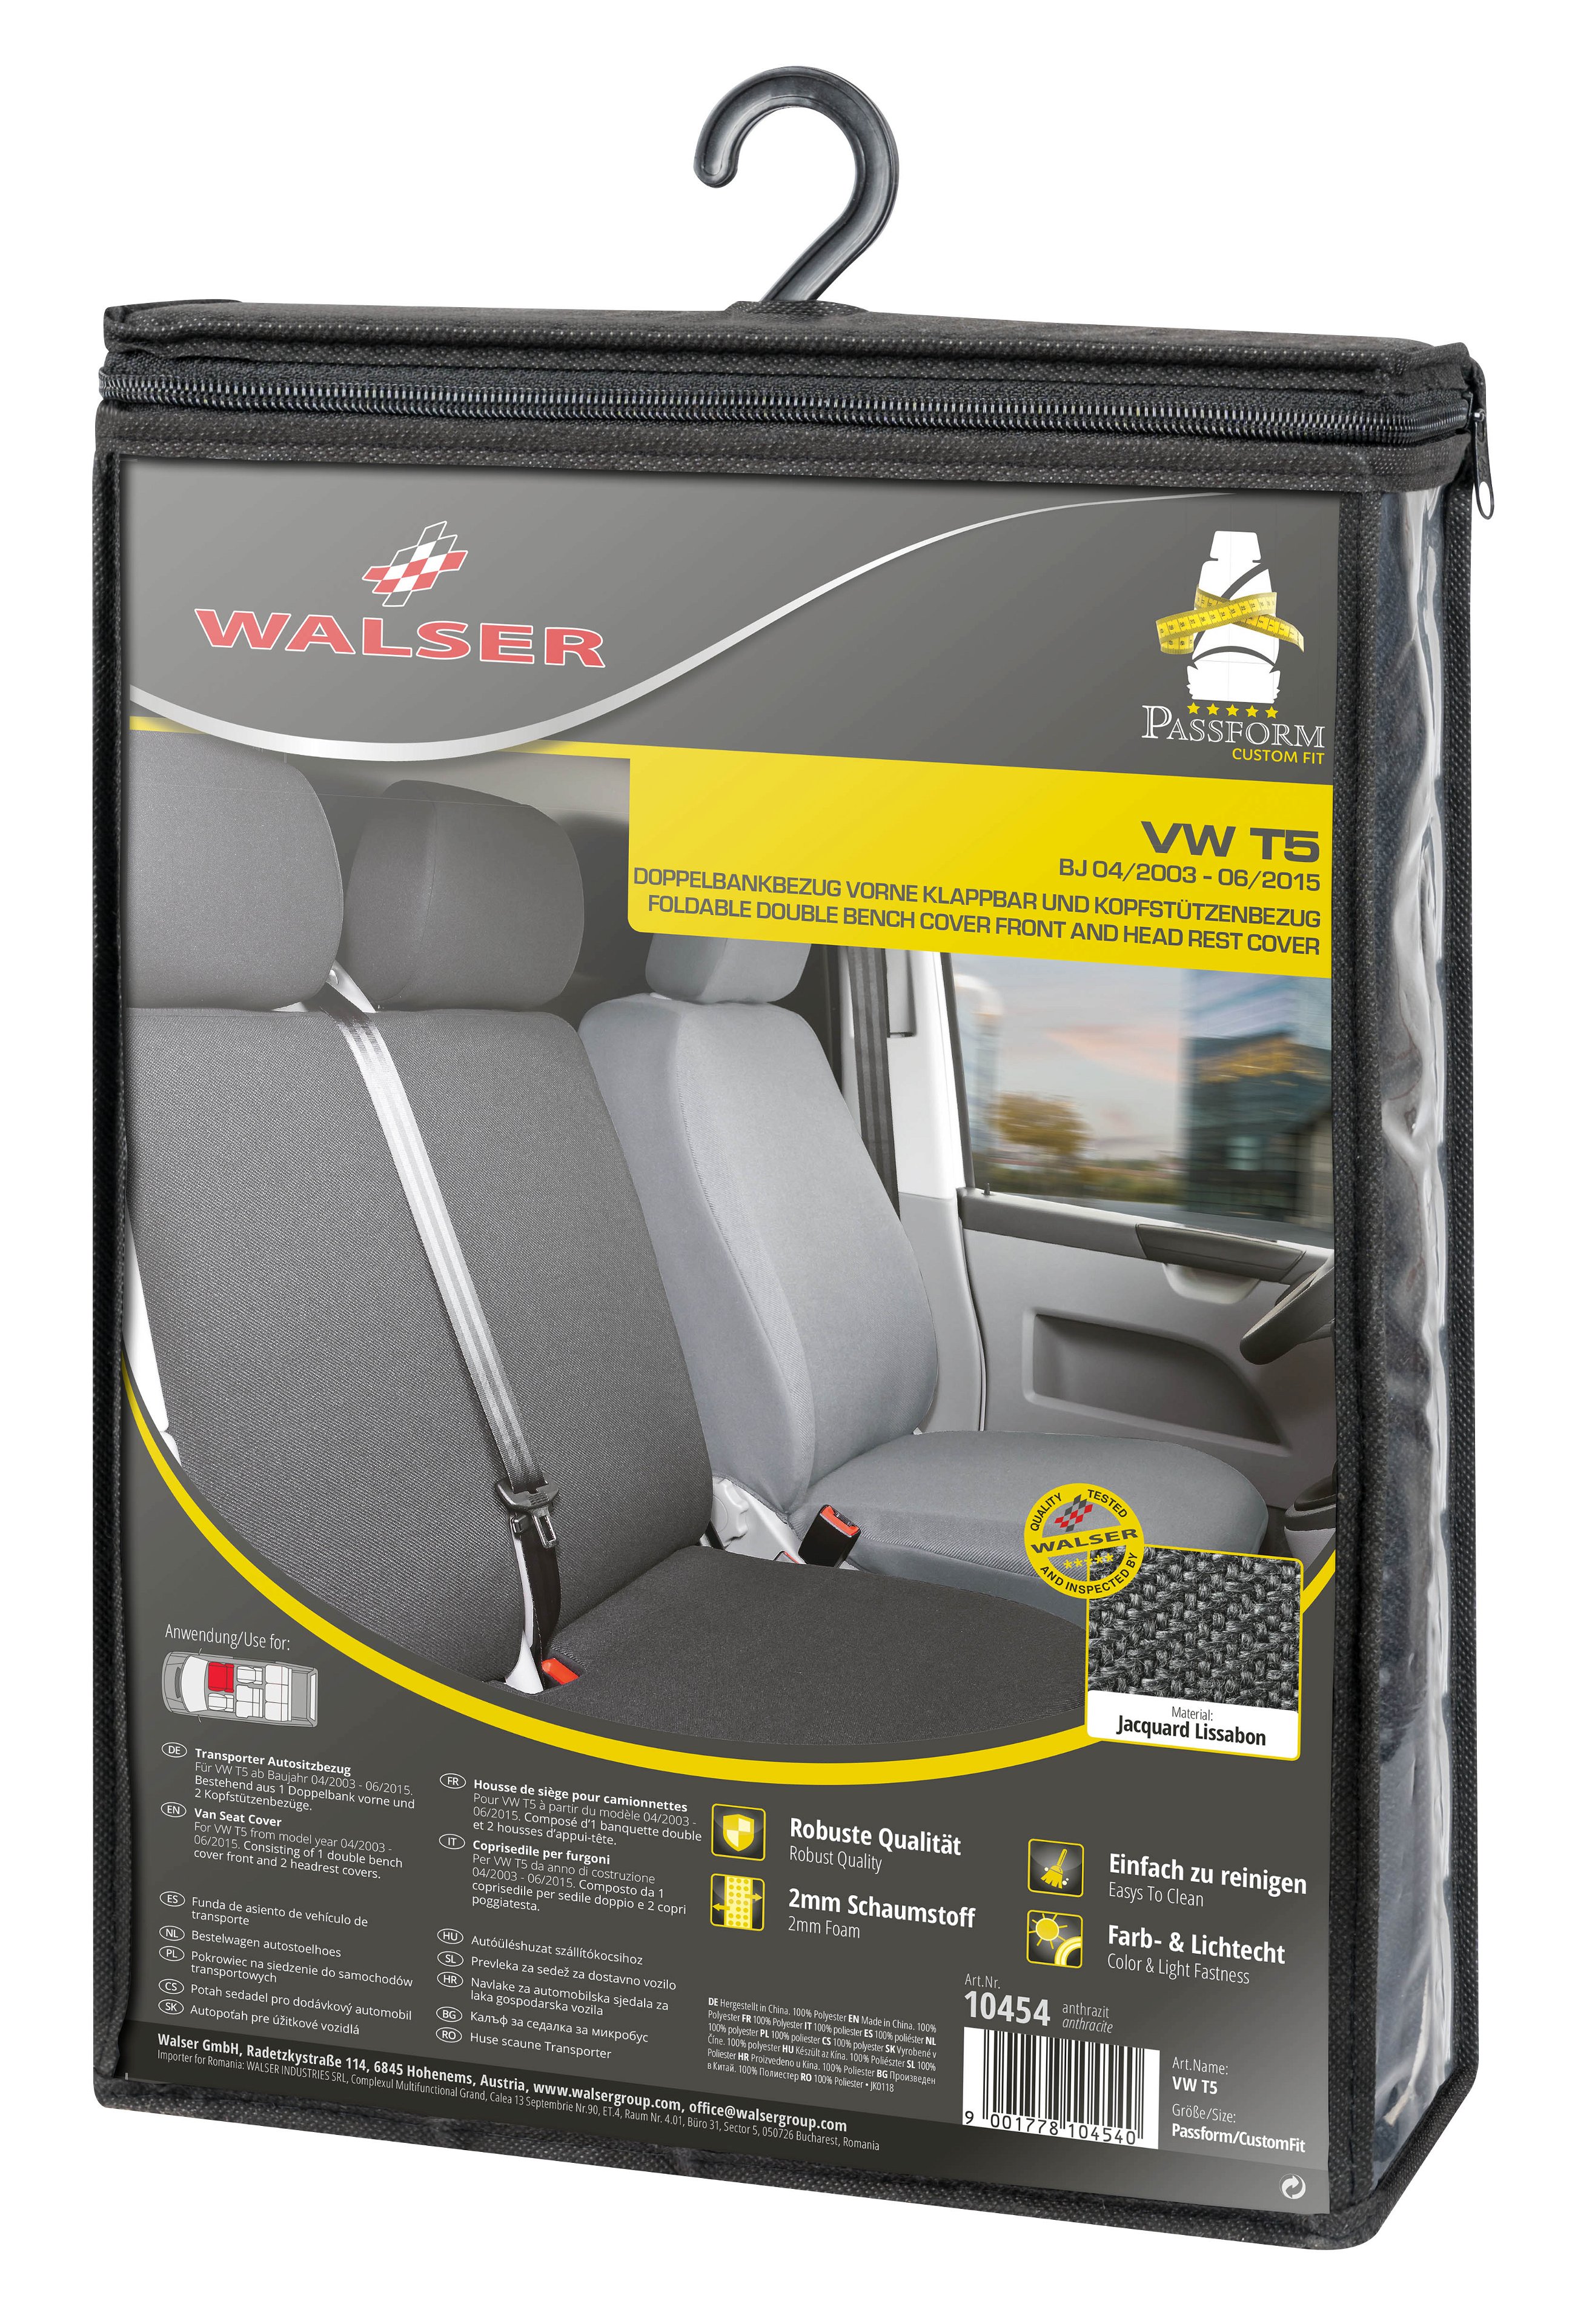 Seat cover made of fabric for VW T5, double bench cover foldable in front